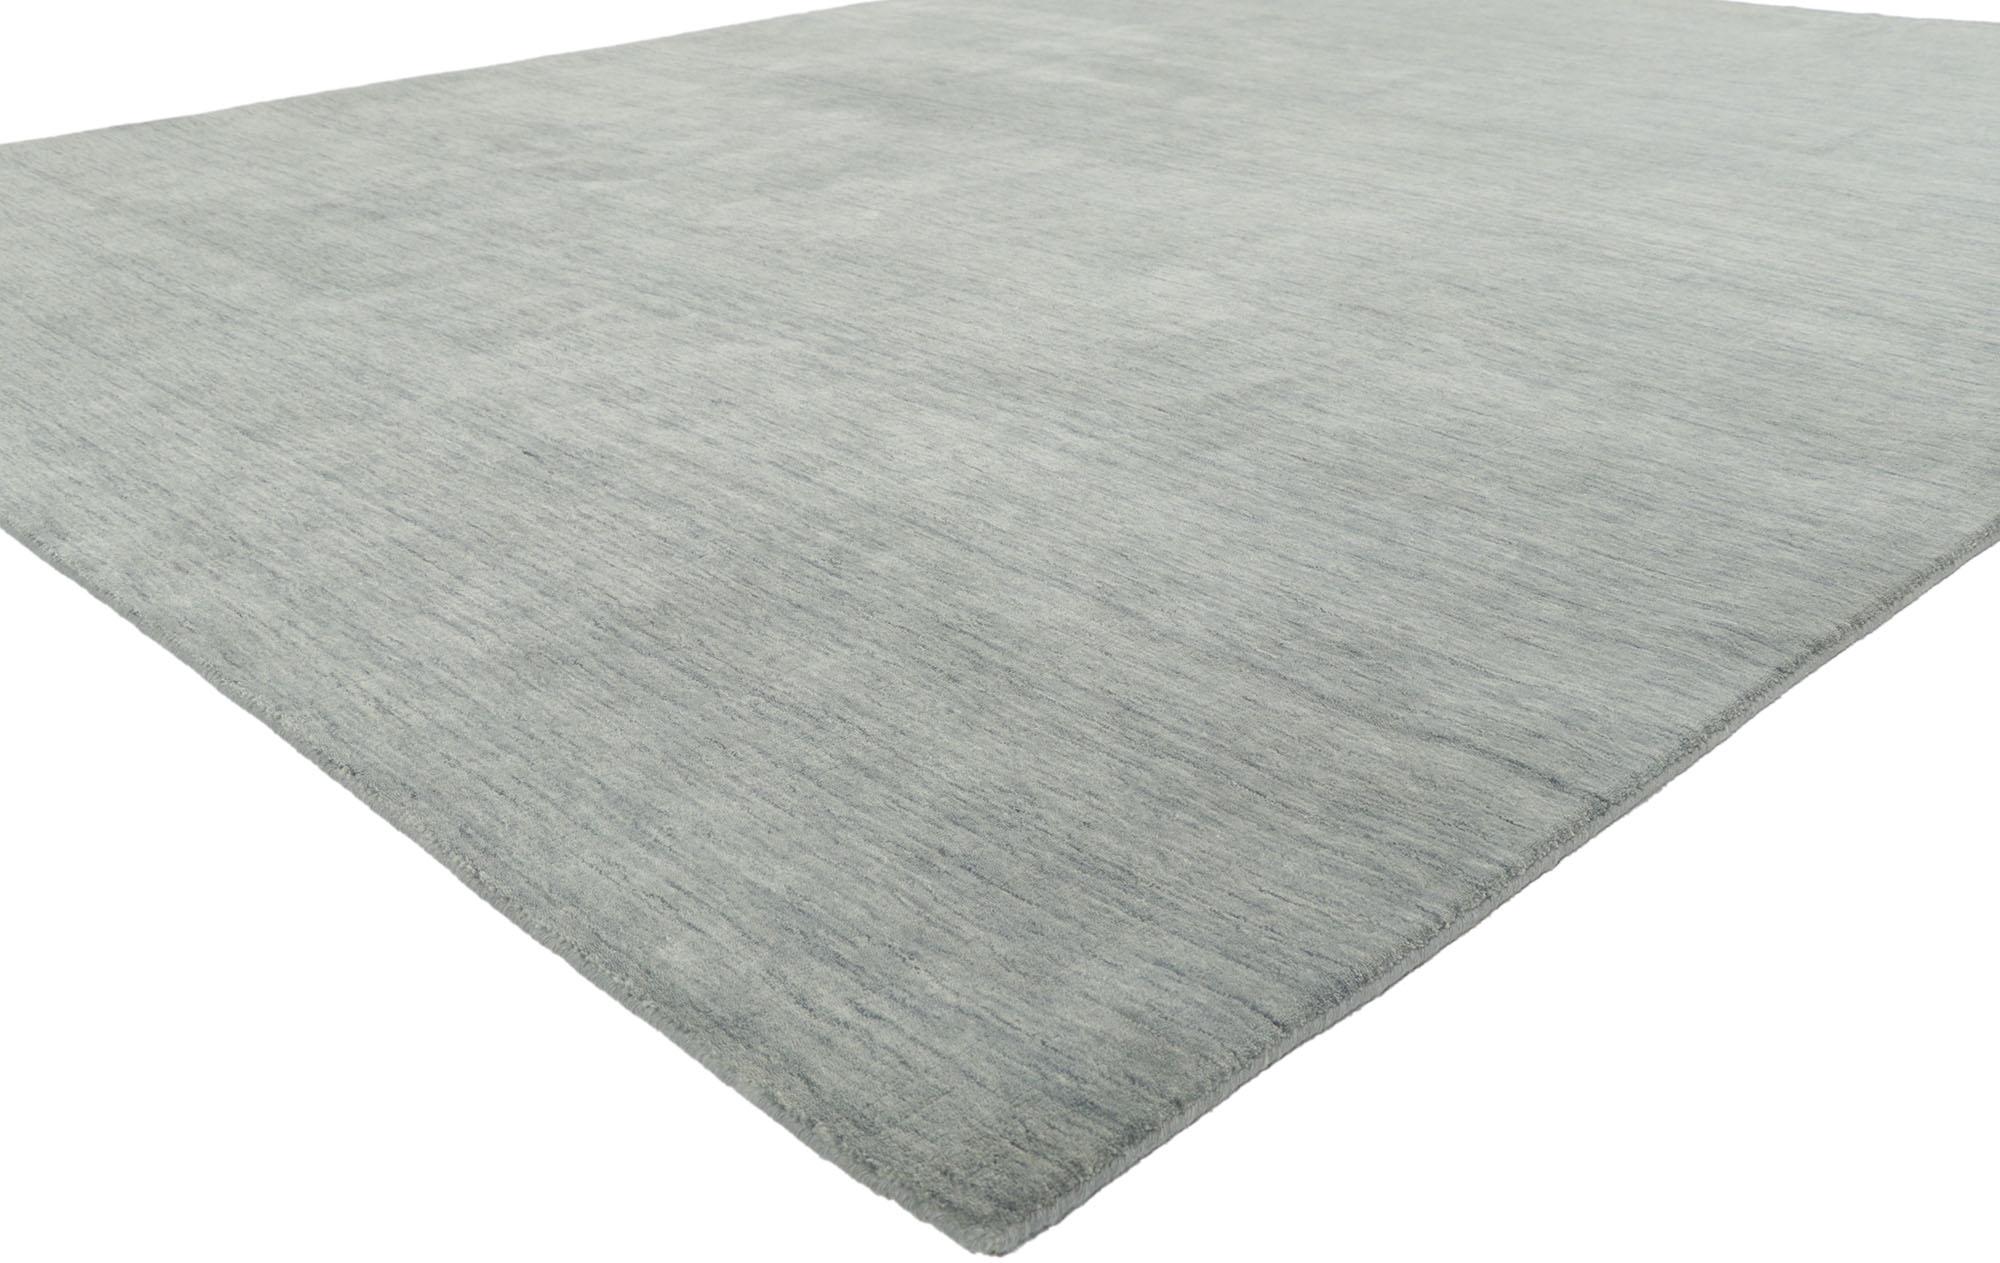 30737 New Contemporary Grey Area rug with Modern Style 08'03 x 10'01. Effortless beauty combined with simplicity and modern style, this hand-loom wool contemporary Indian rug provides a feeling of cozy contentment without the clutter. Imbued with